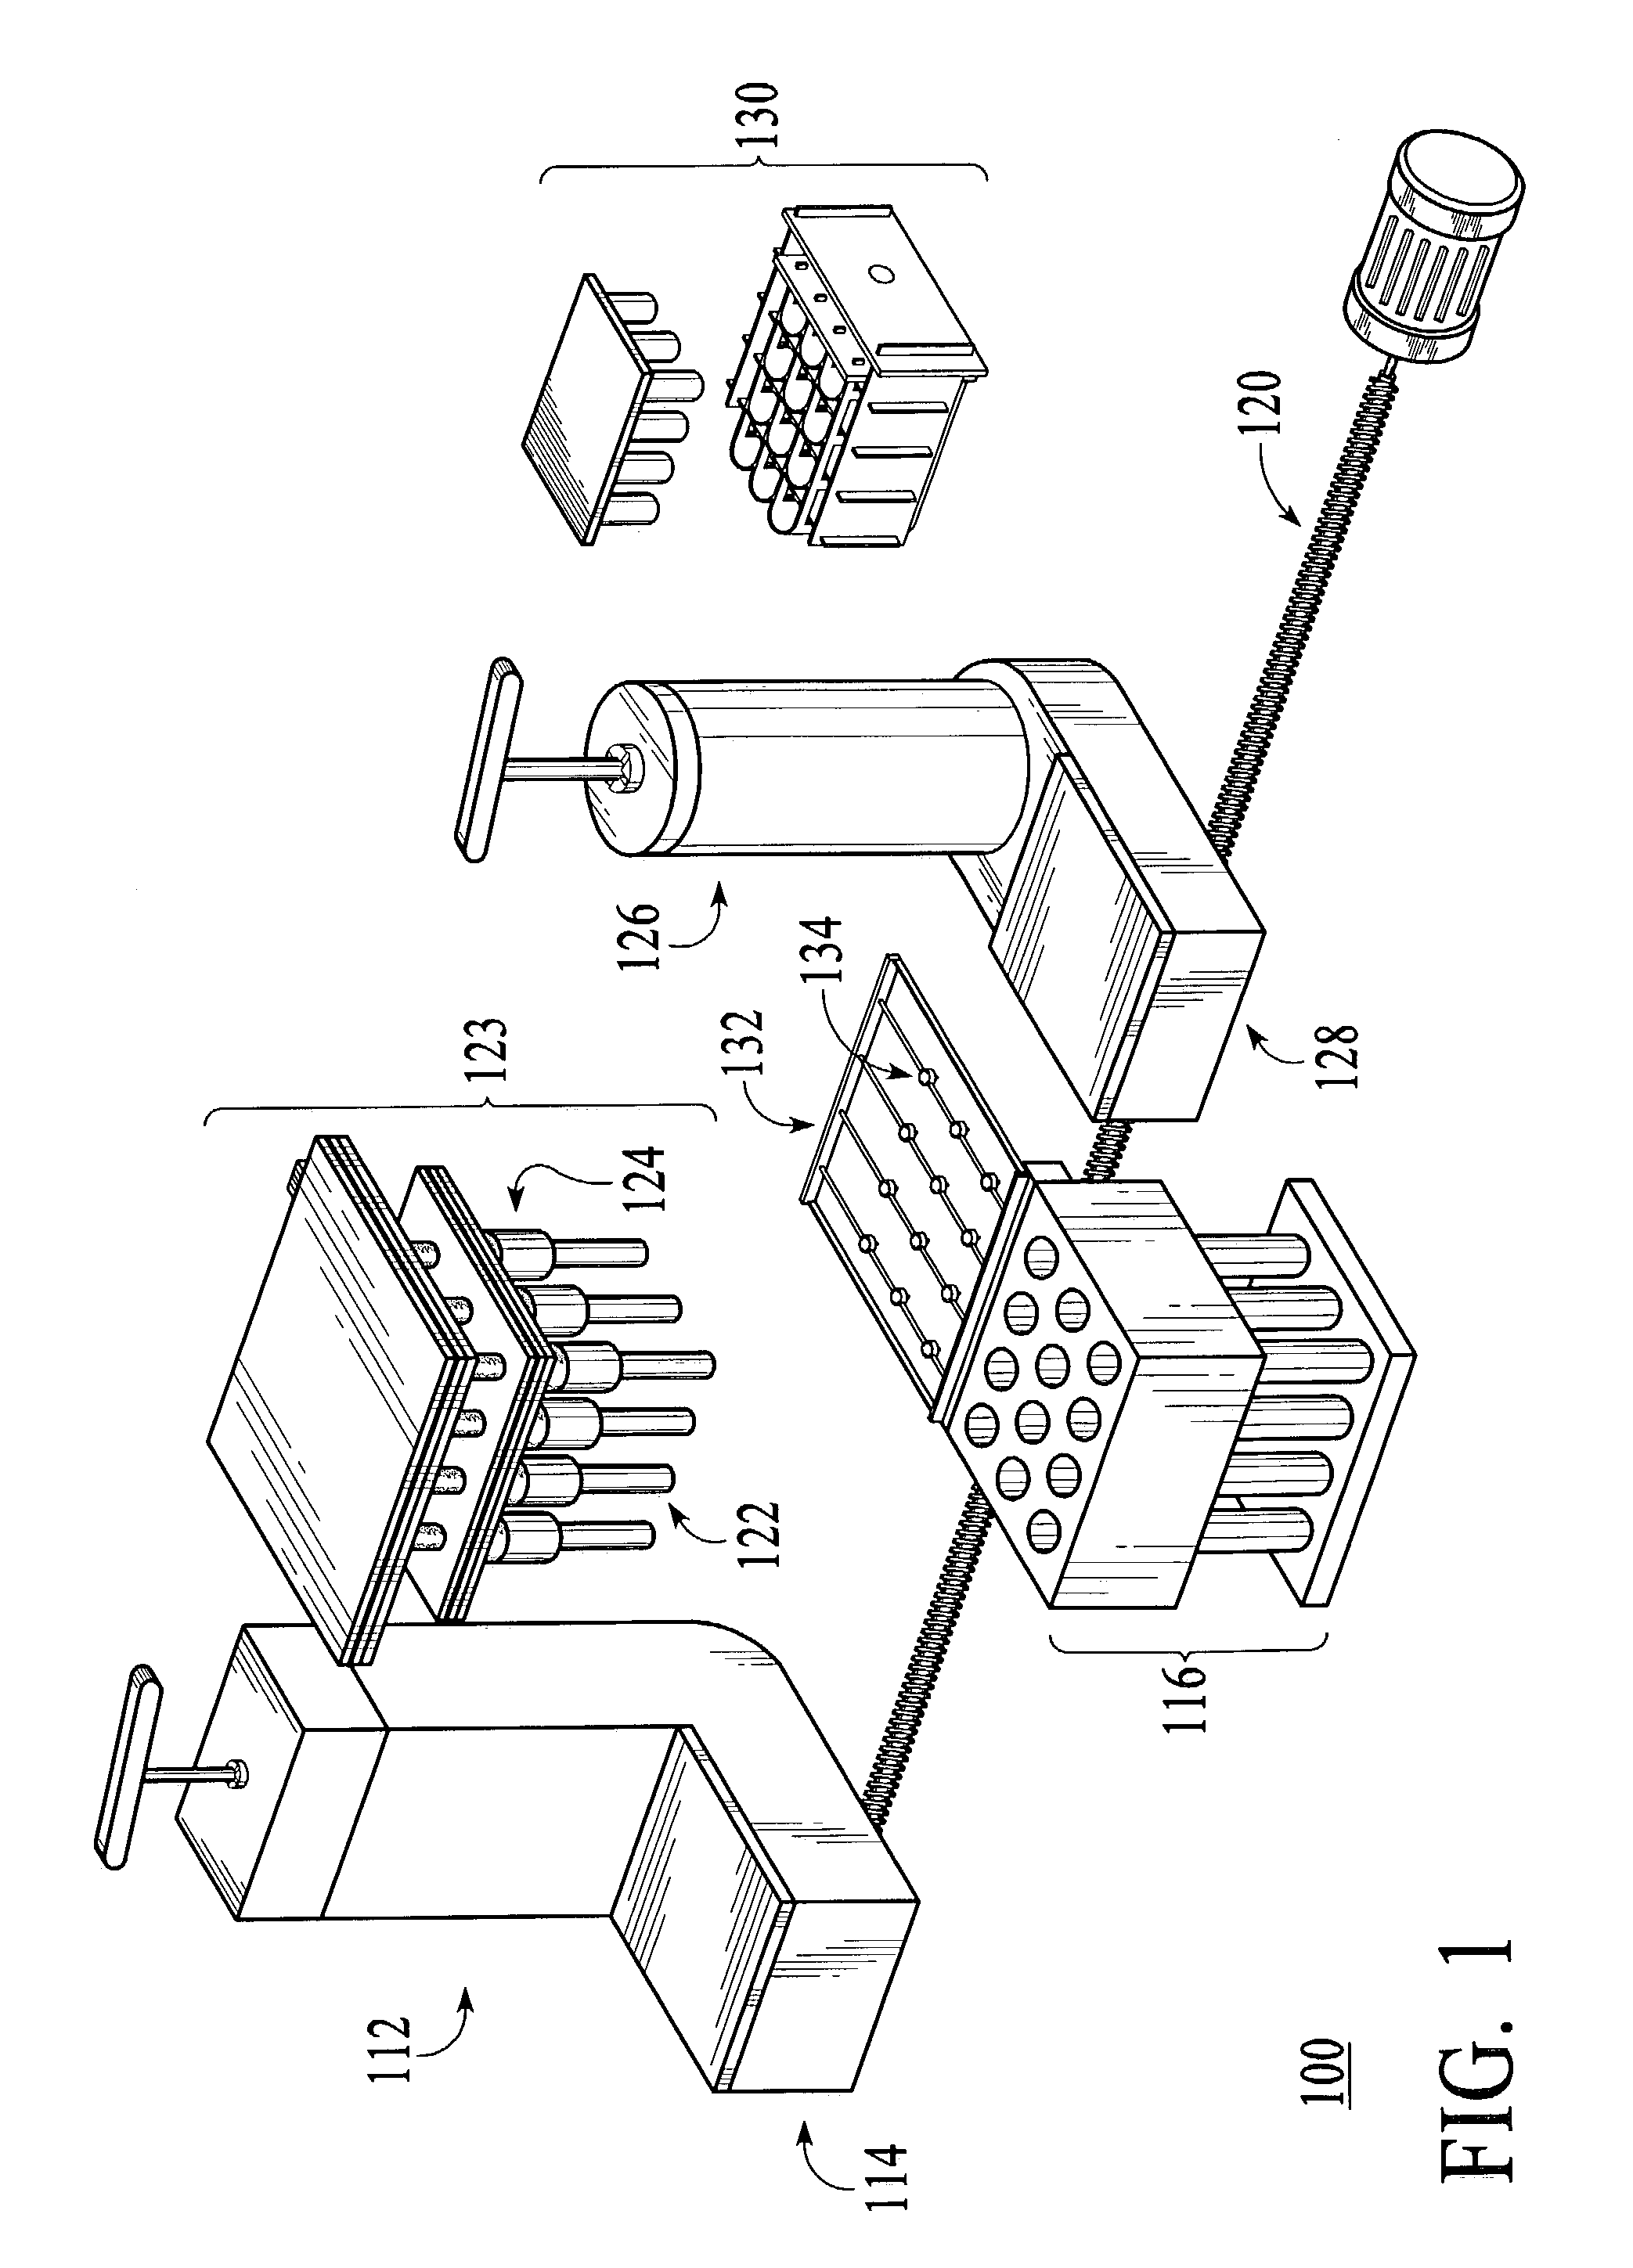 Method and apparatus for making a hand held food product